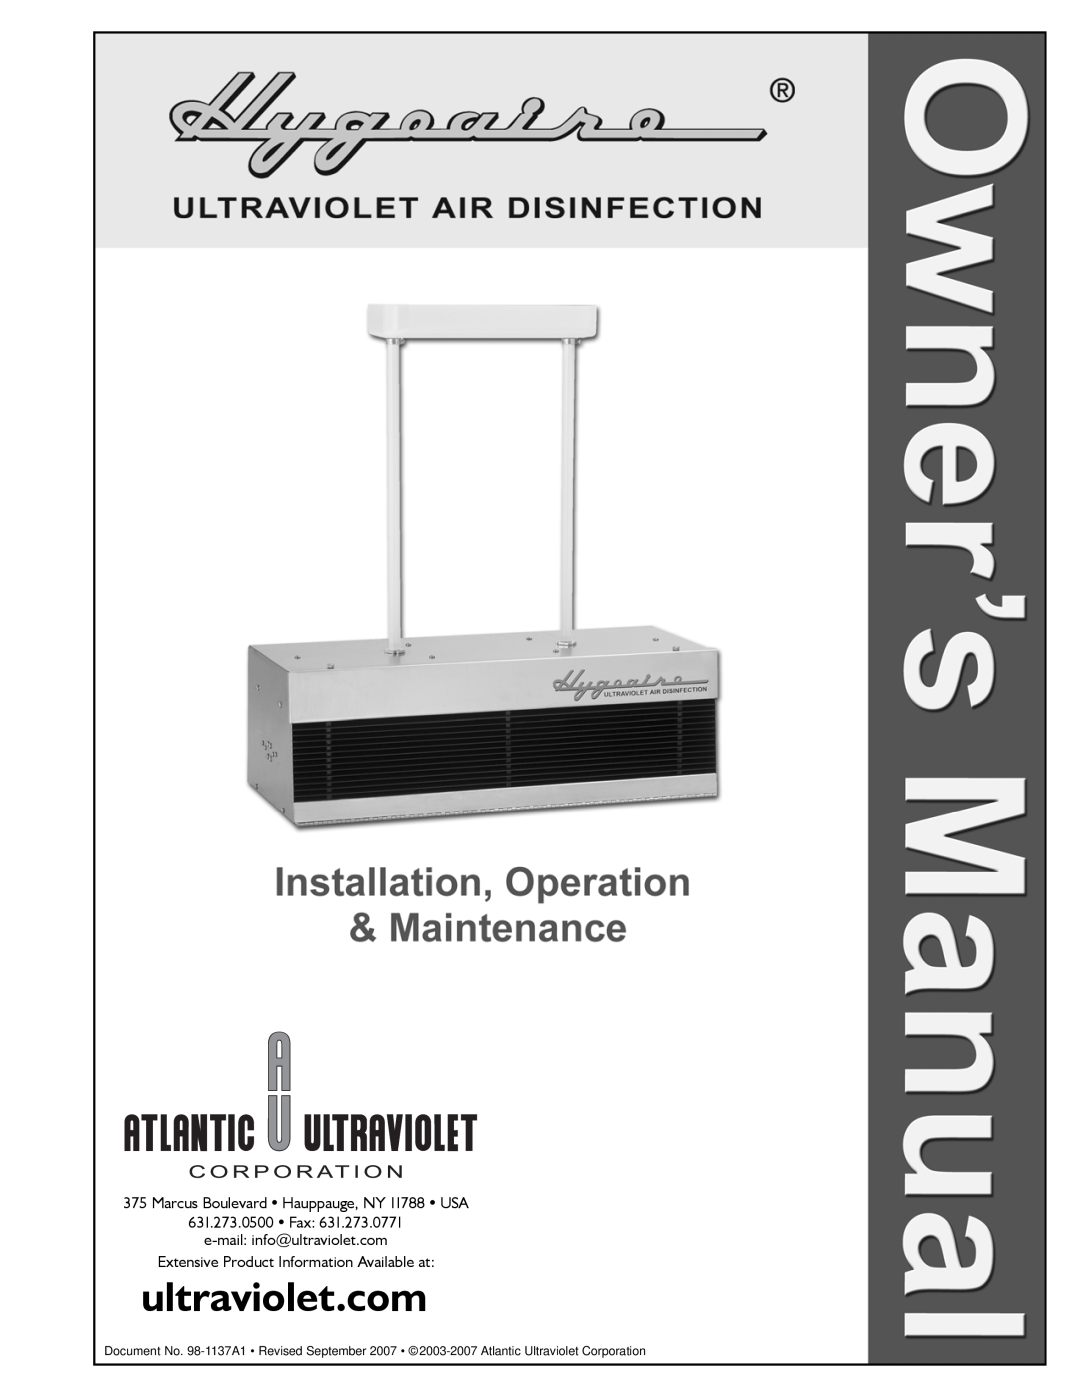 UltraViolet Devices Air Disinfection manual Marcus Boulevard Hauppauge, NY 11788 USA 